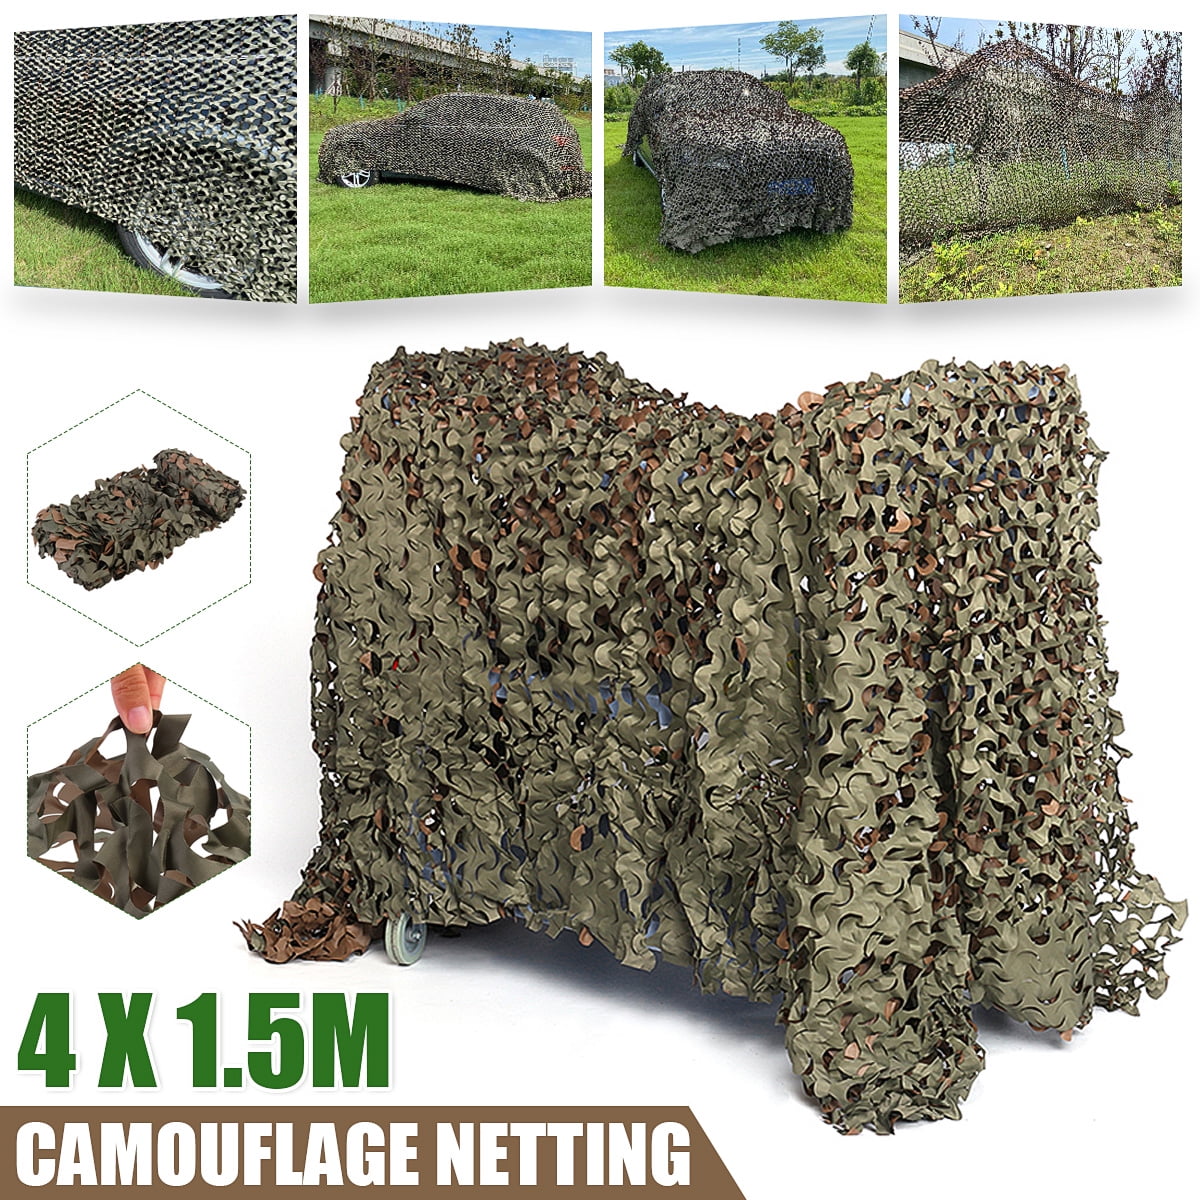 Camo Netting Blinds Great for Sunshade Camping Shooting Hunting Party Decoration 